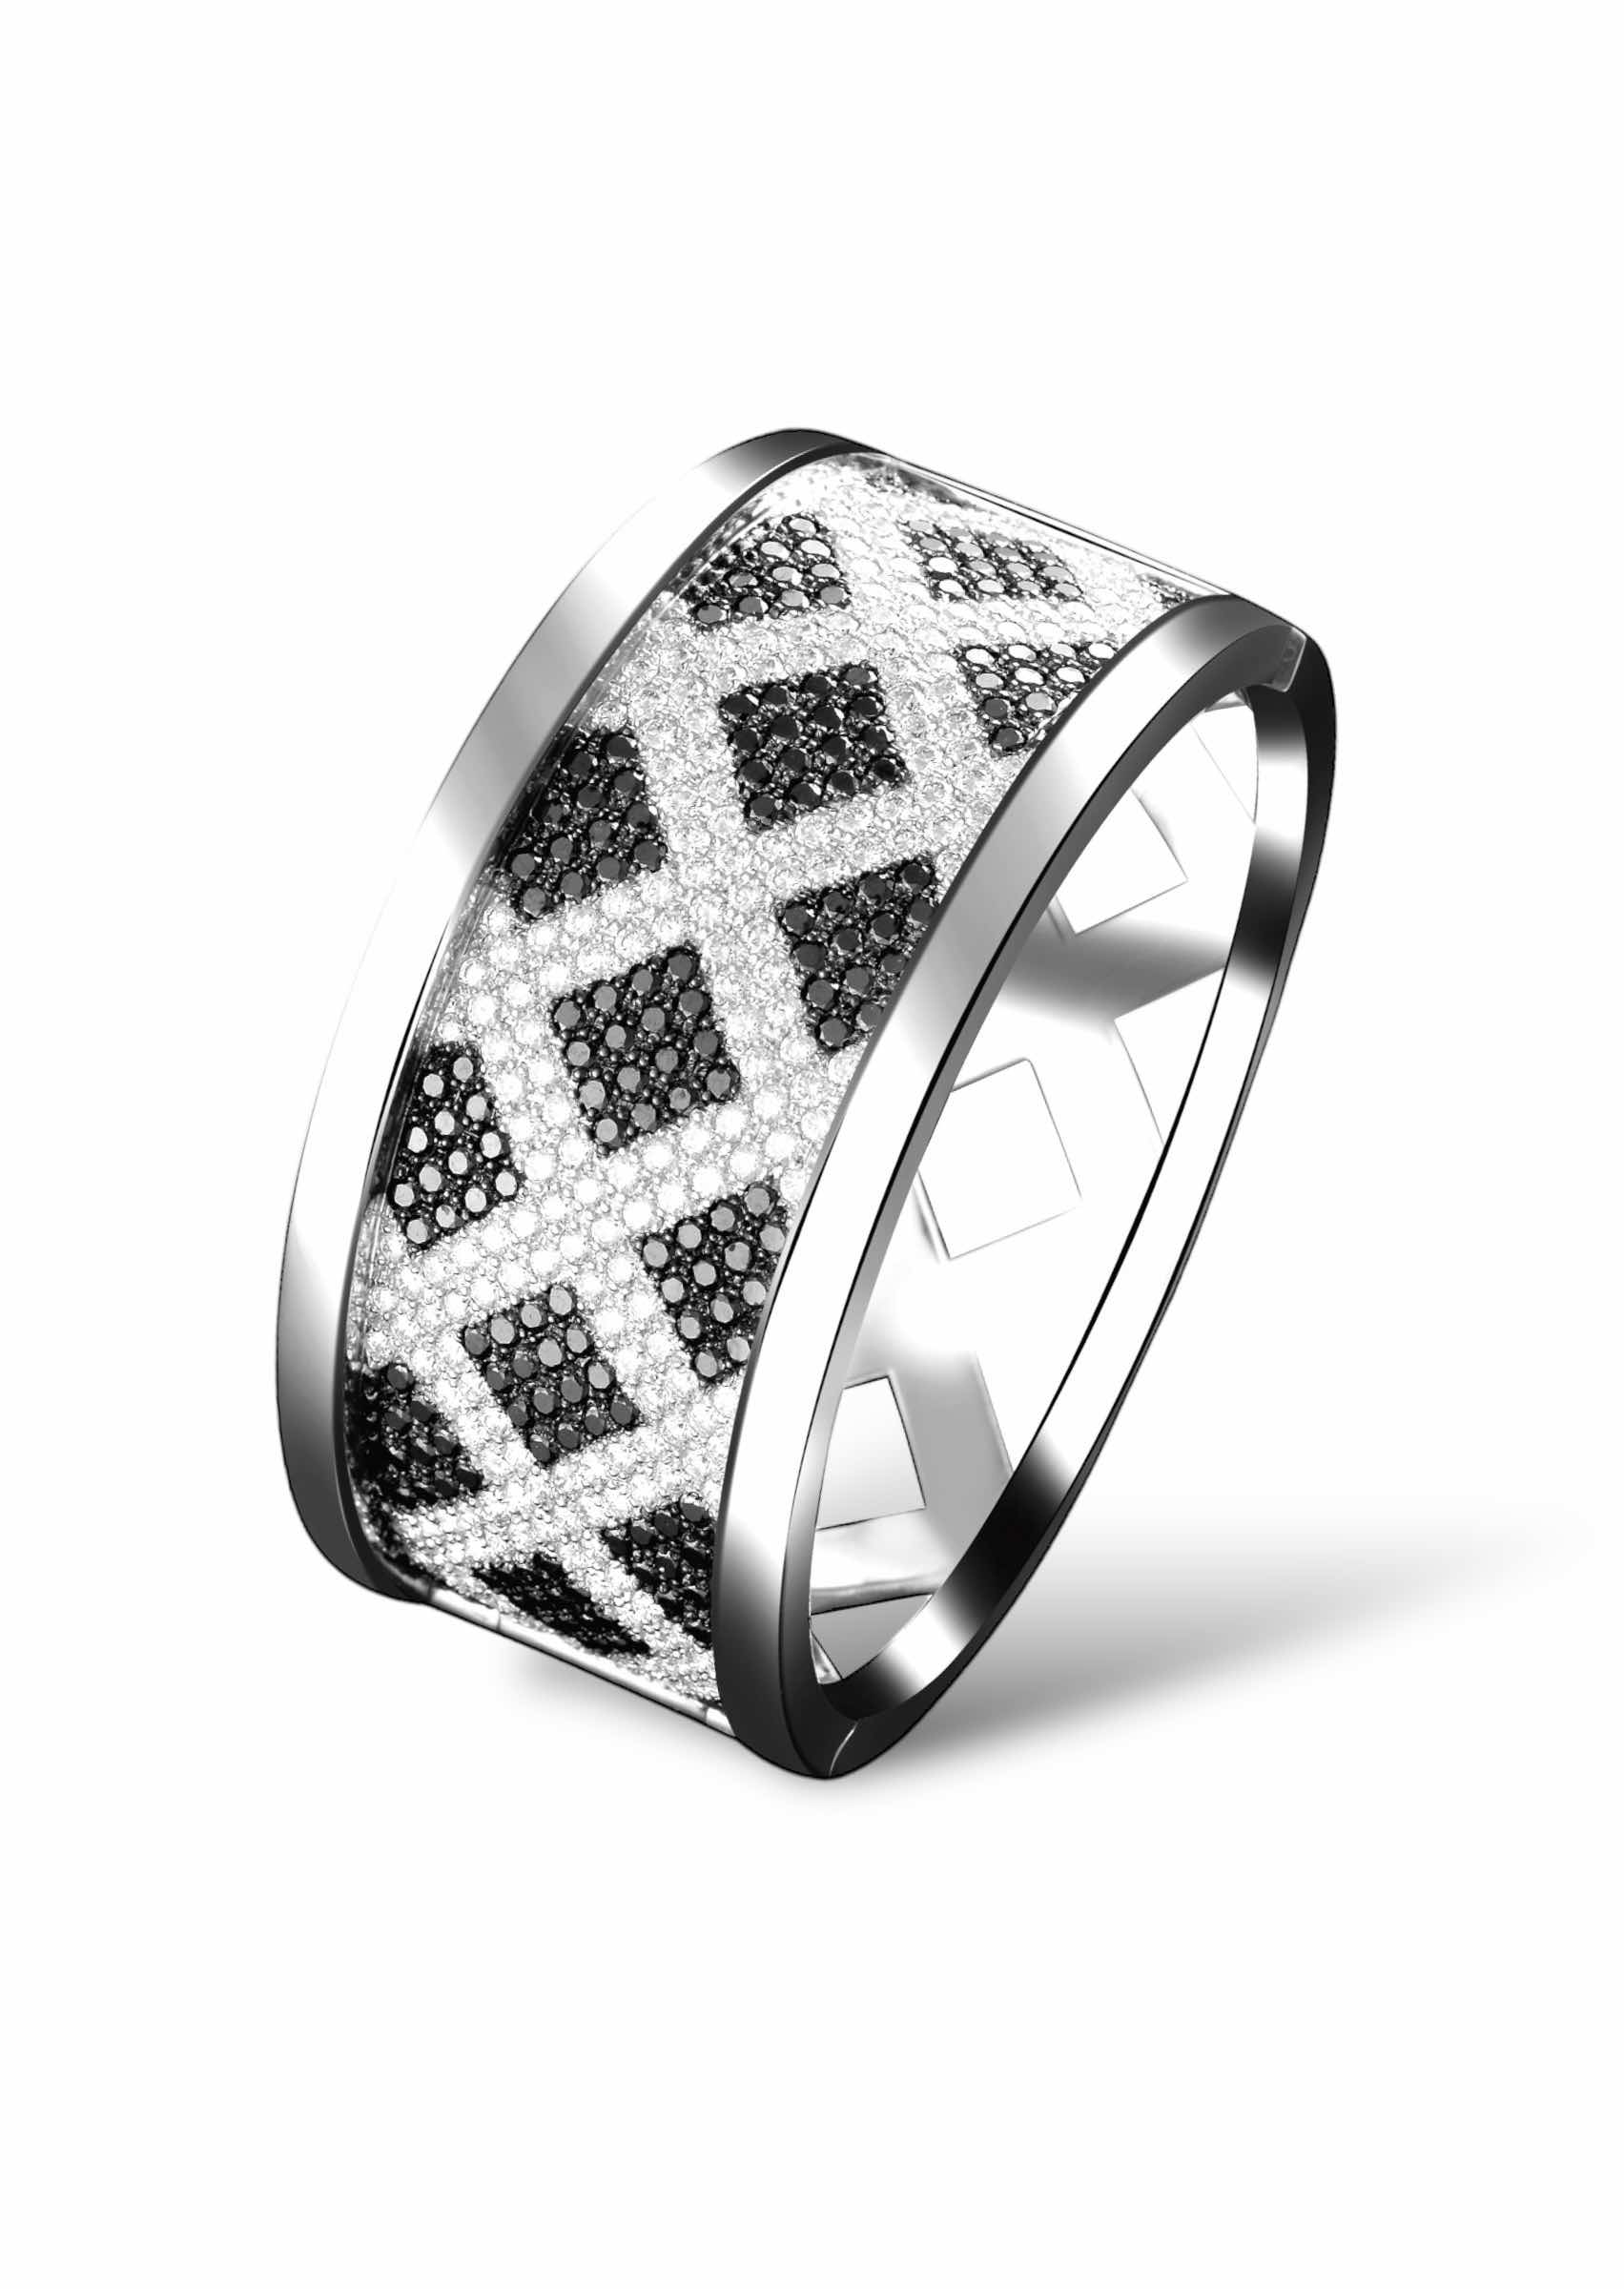 D.Bachet's Couture Cuff in white gold with black and white diamonds, a symbol of excellence in high jewelry.